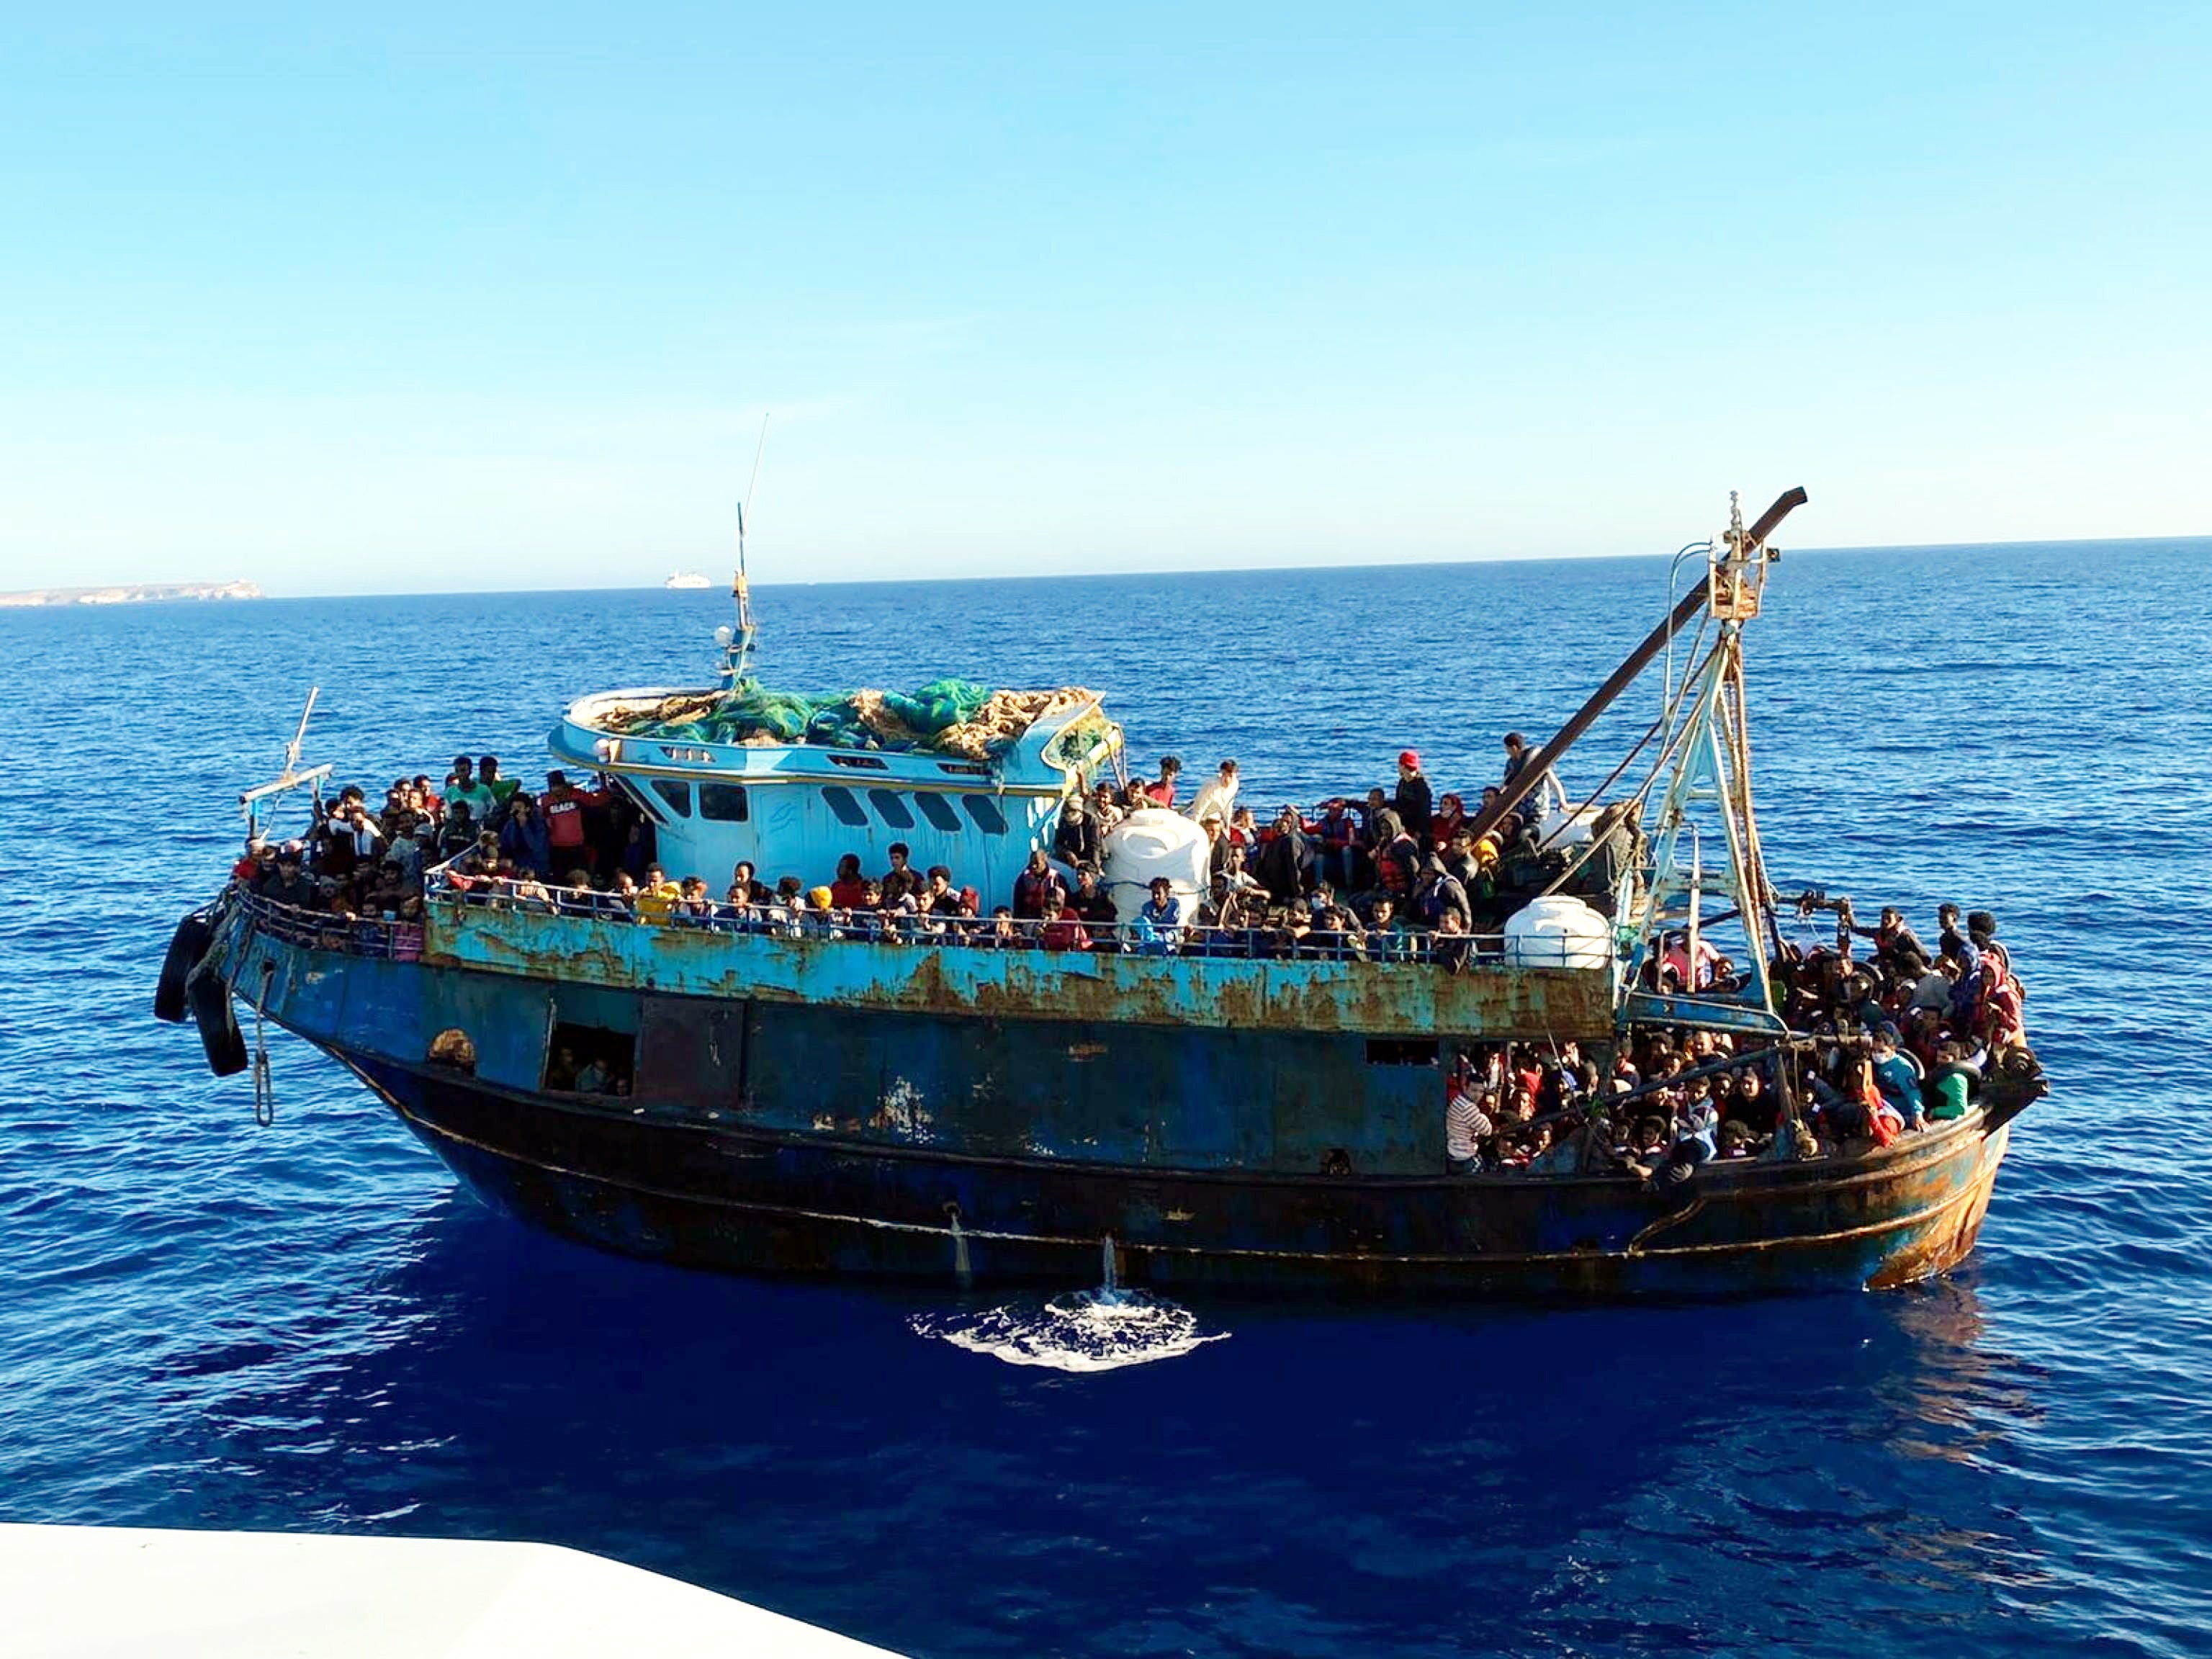 Lampedusa is one of the main entry points for migrants coming from Tunisia and Libya